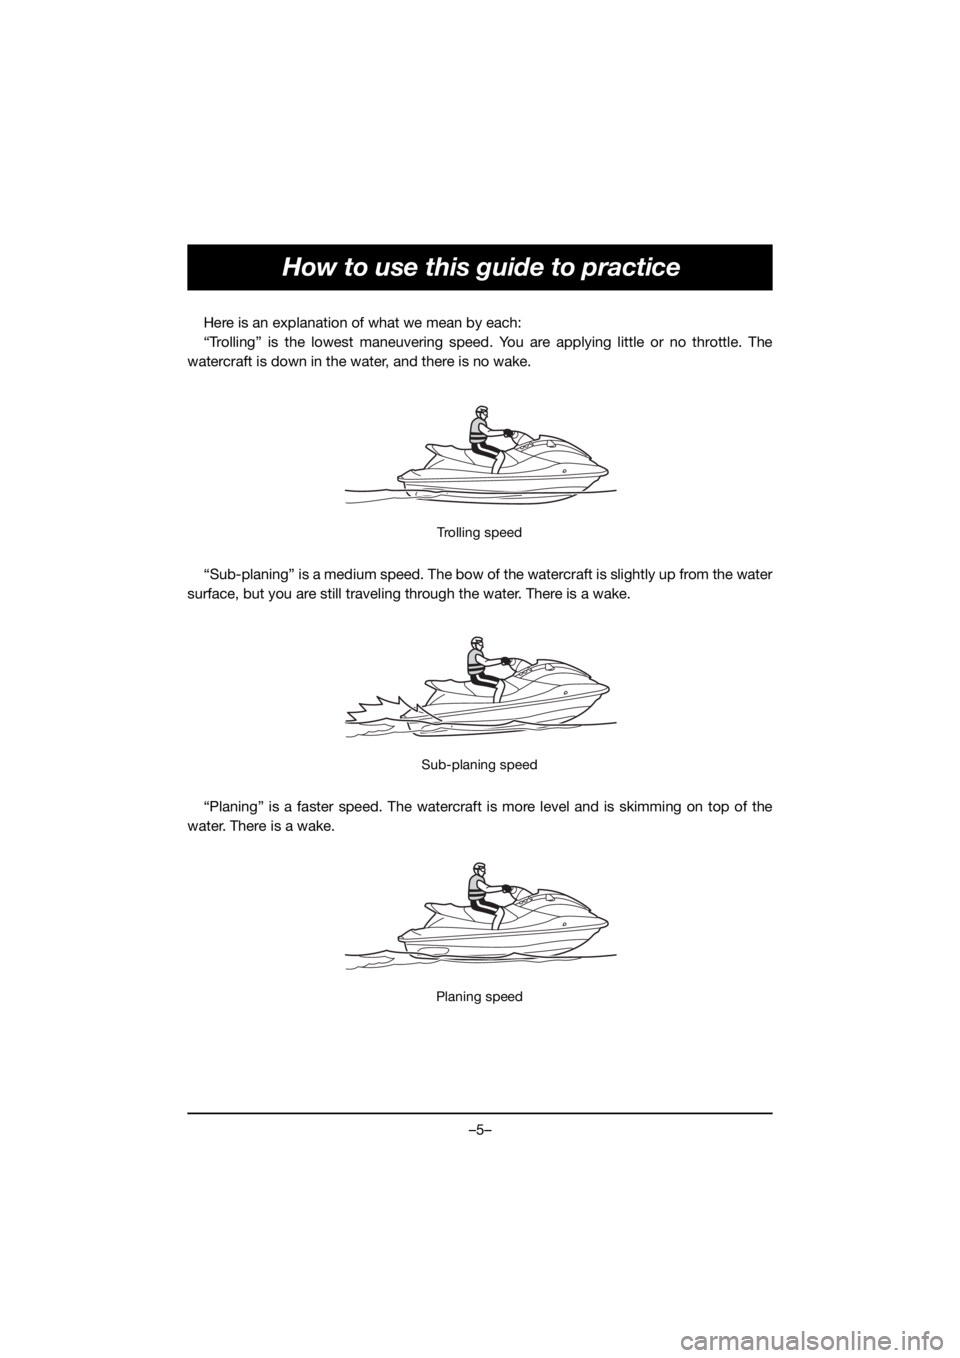 YAMAHA VX DELUXE 2020  Manual de utilização (in Portuguese) –5–
How to use this guide to practice
Here is an explanation of what we mean by each:
“Trolling” is the lowest maneuvering speed. You are applying little or no throttle. The
watercraft is down